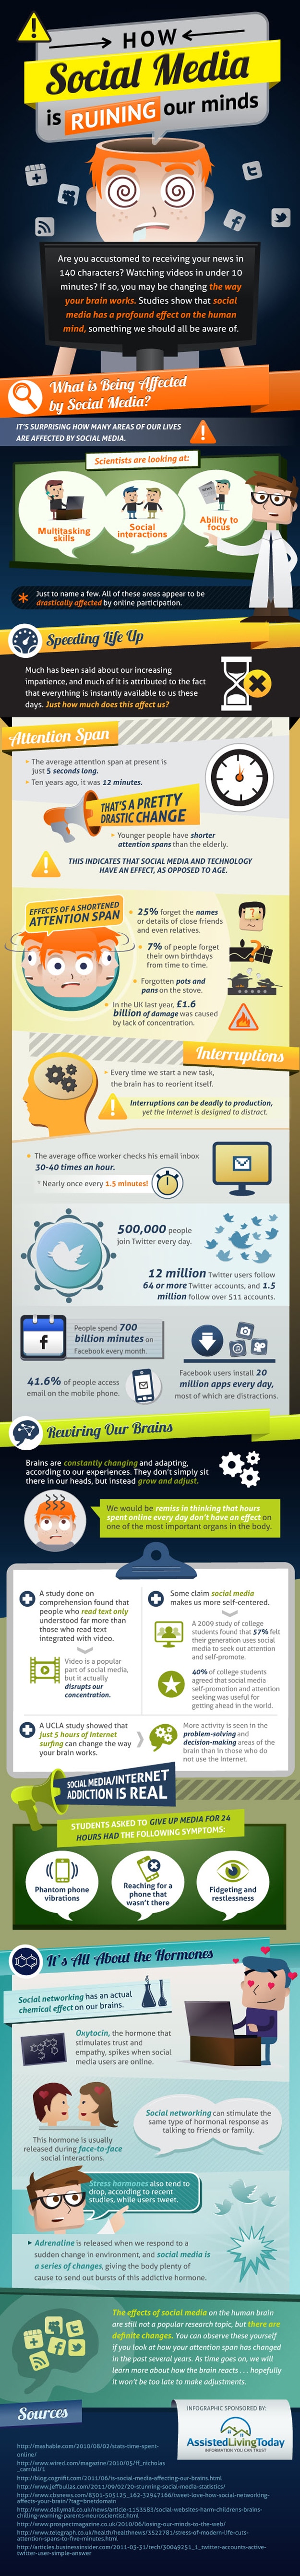 How Social Media Is Ruining Our Minds [Infographic]